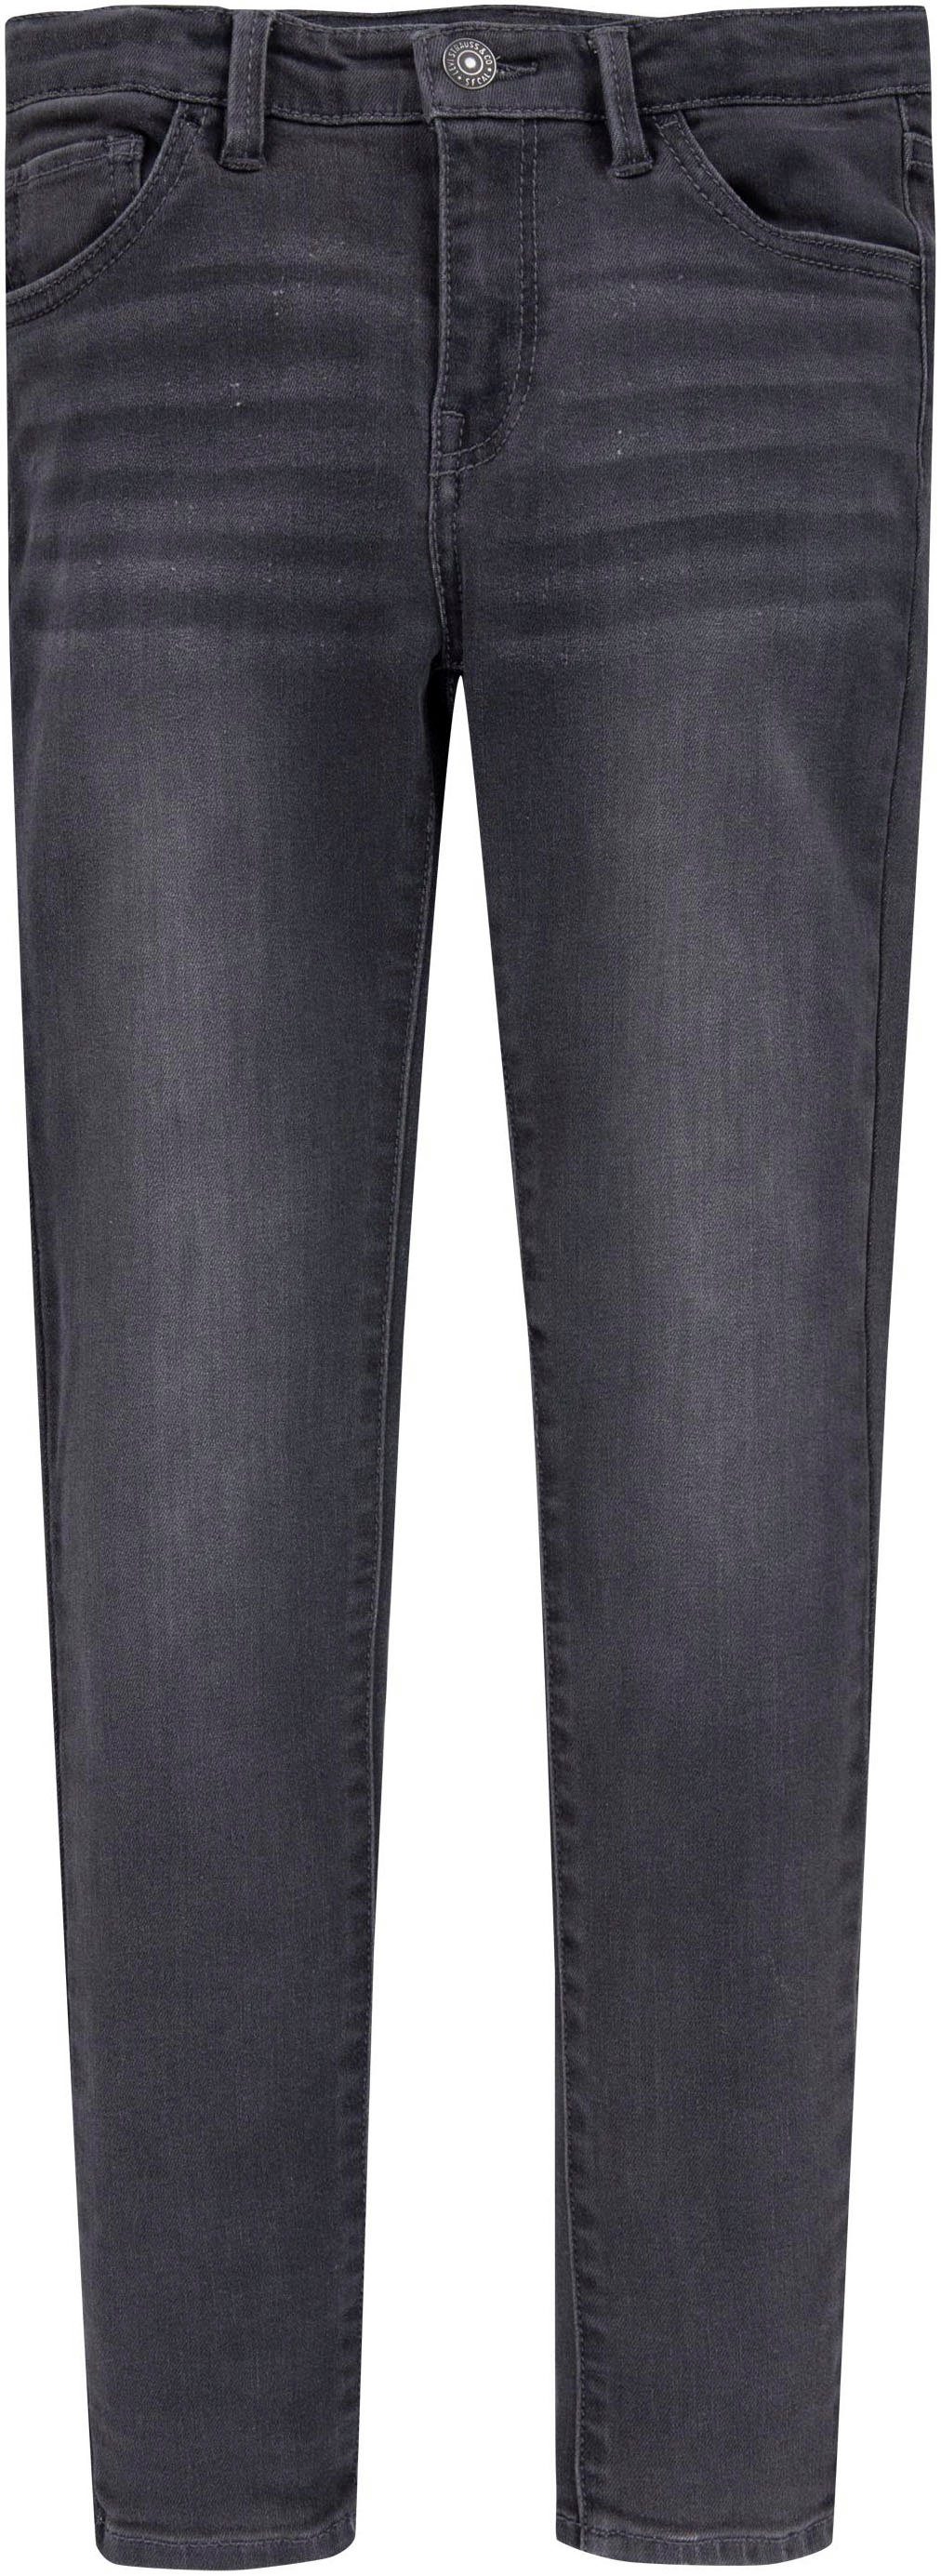 710™ baton SKINNY Stretch-Jeans JEANS Kids GIRLS Levi's® for FIT rouge SUPER